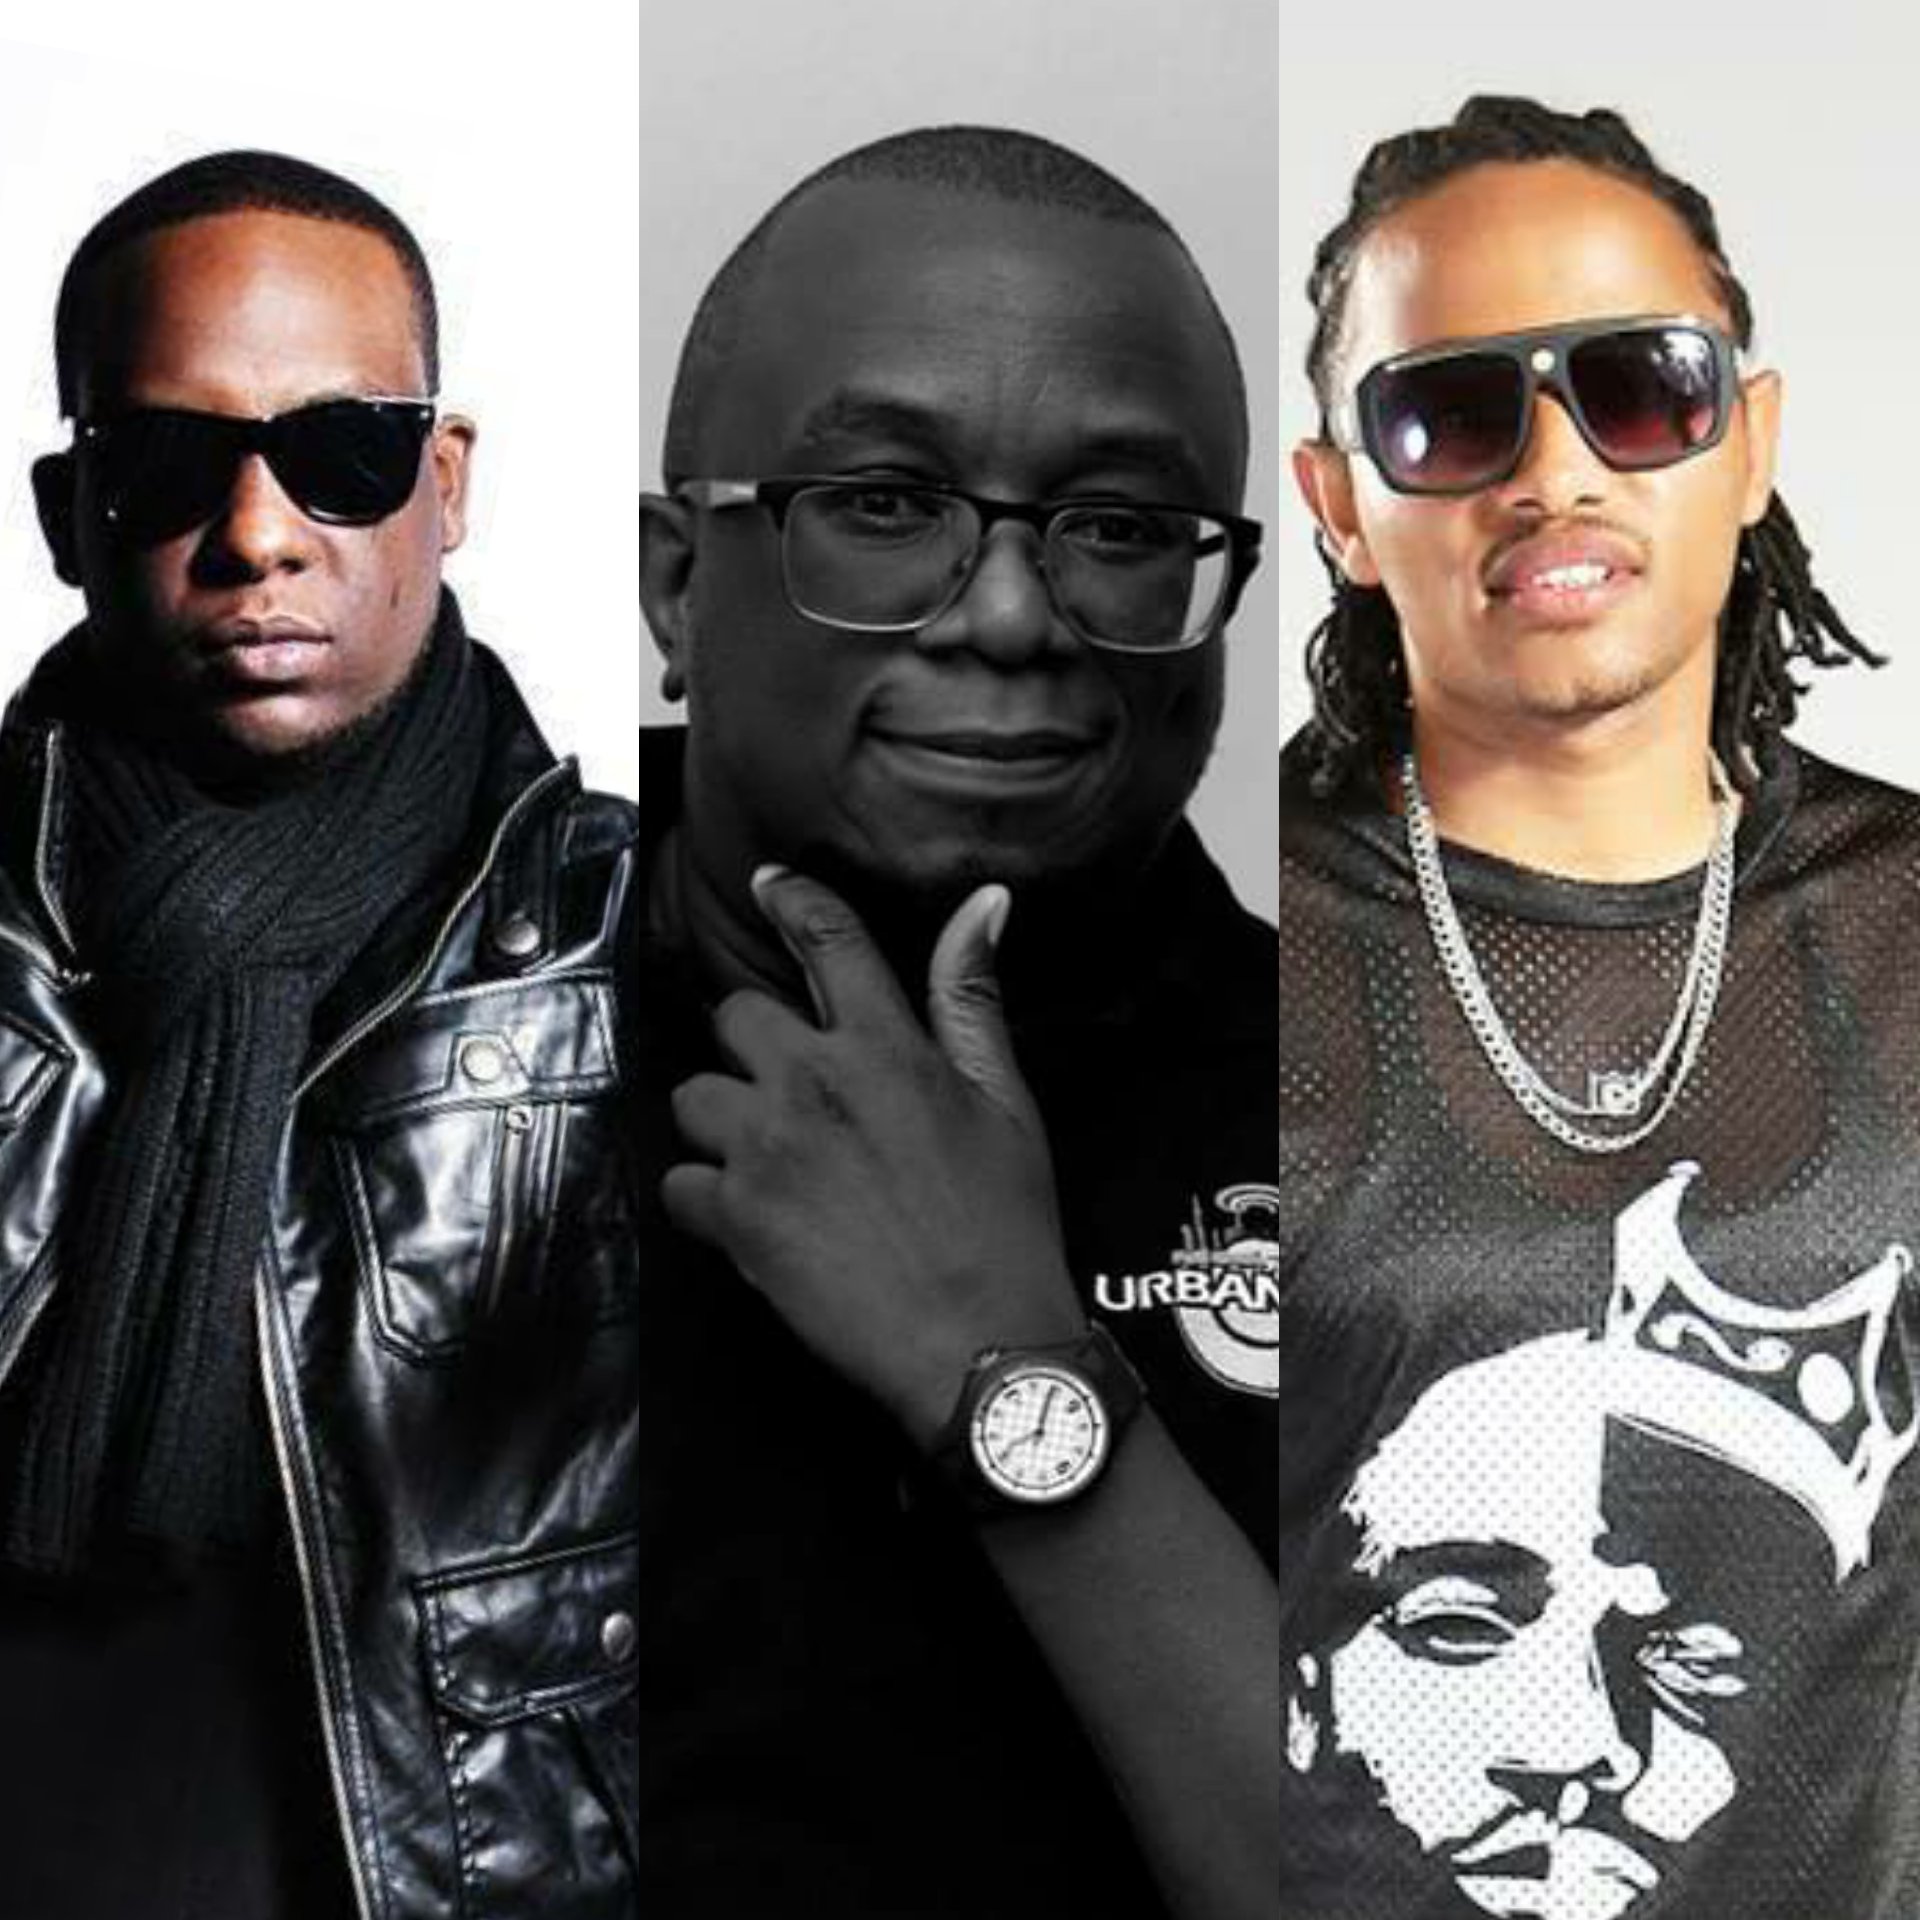 Triple Threat: 3 latest mixes from Kenyan DJs that we can’t get enough of this week